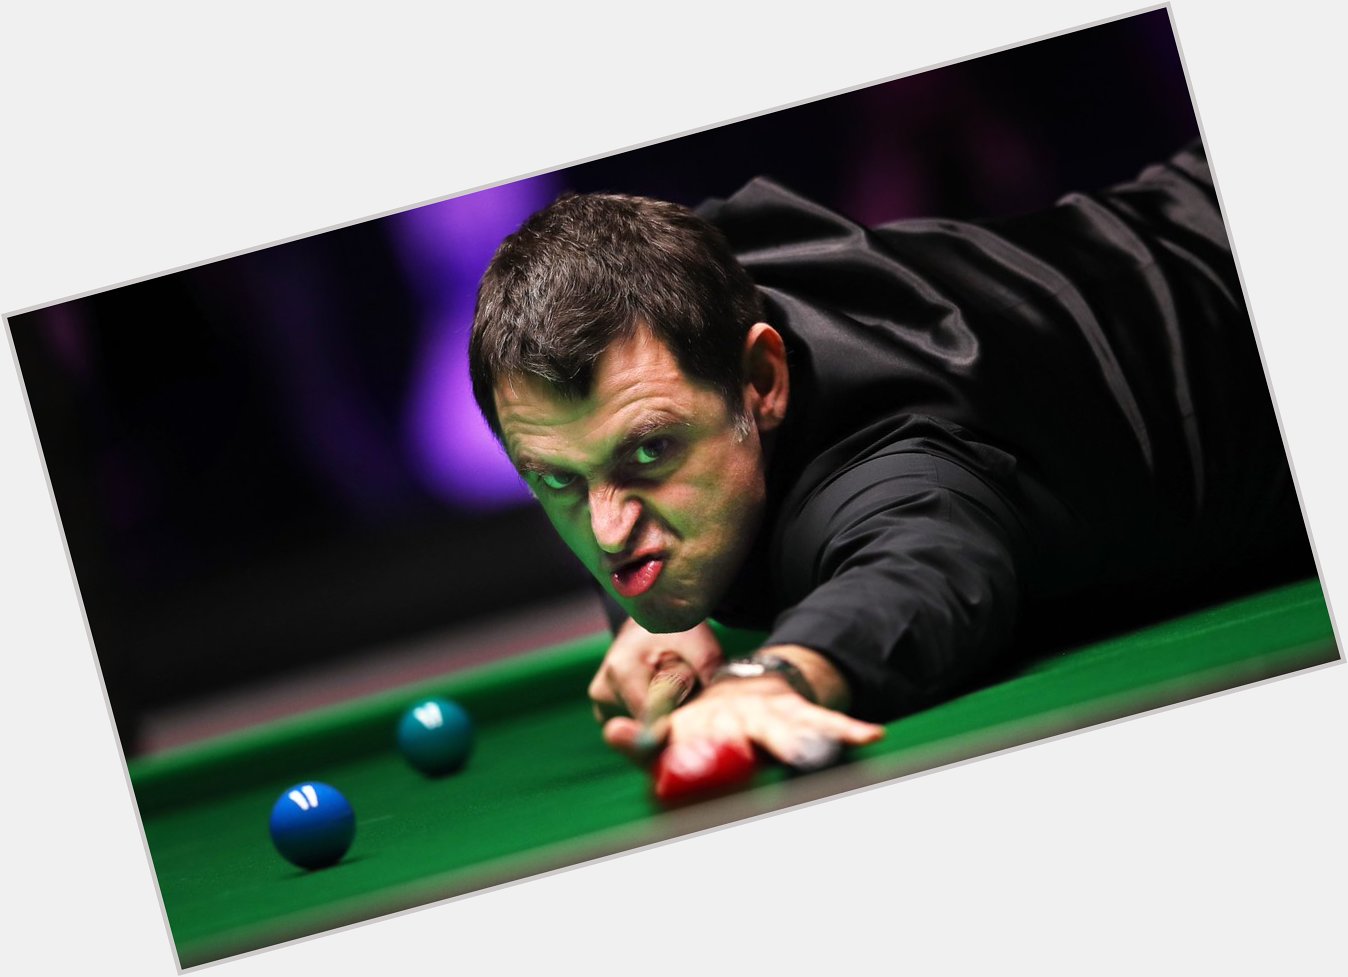  Sometimes, the game feels ridiculously easy.\" Happy 45th birthday, Ronnie O\Sullivan.   